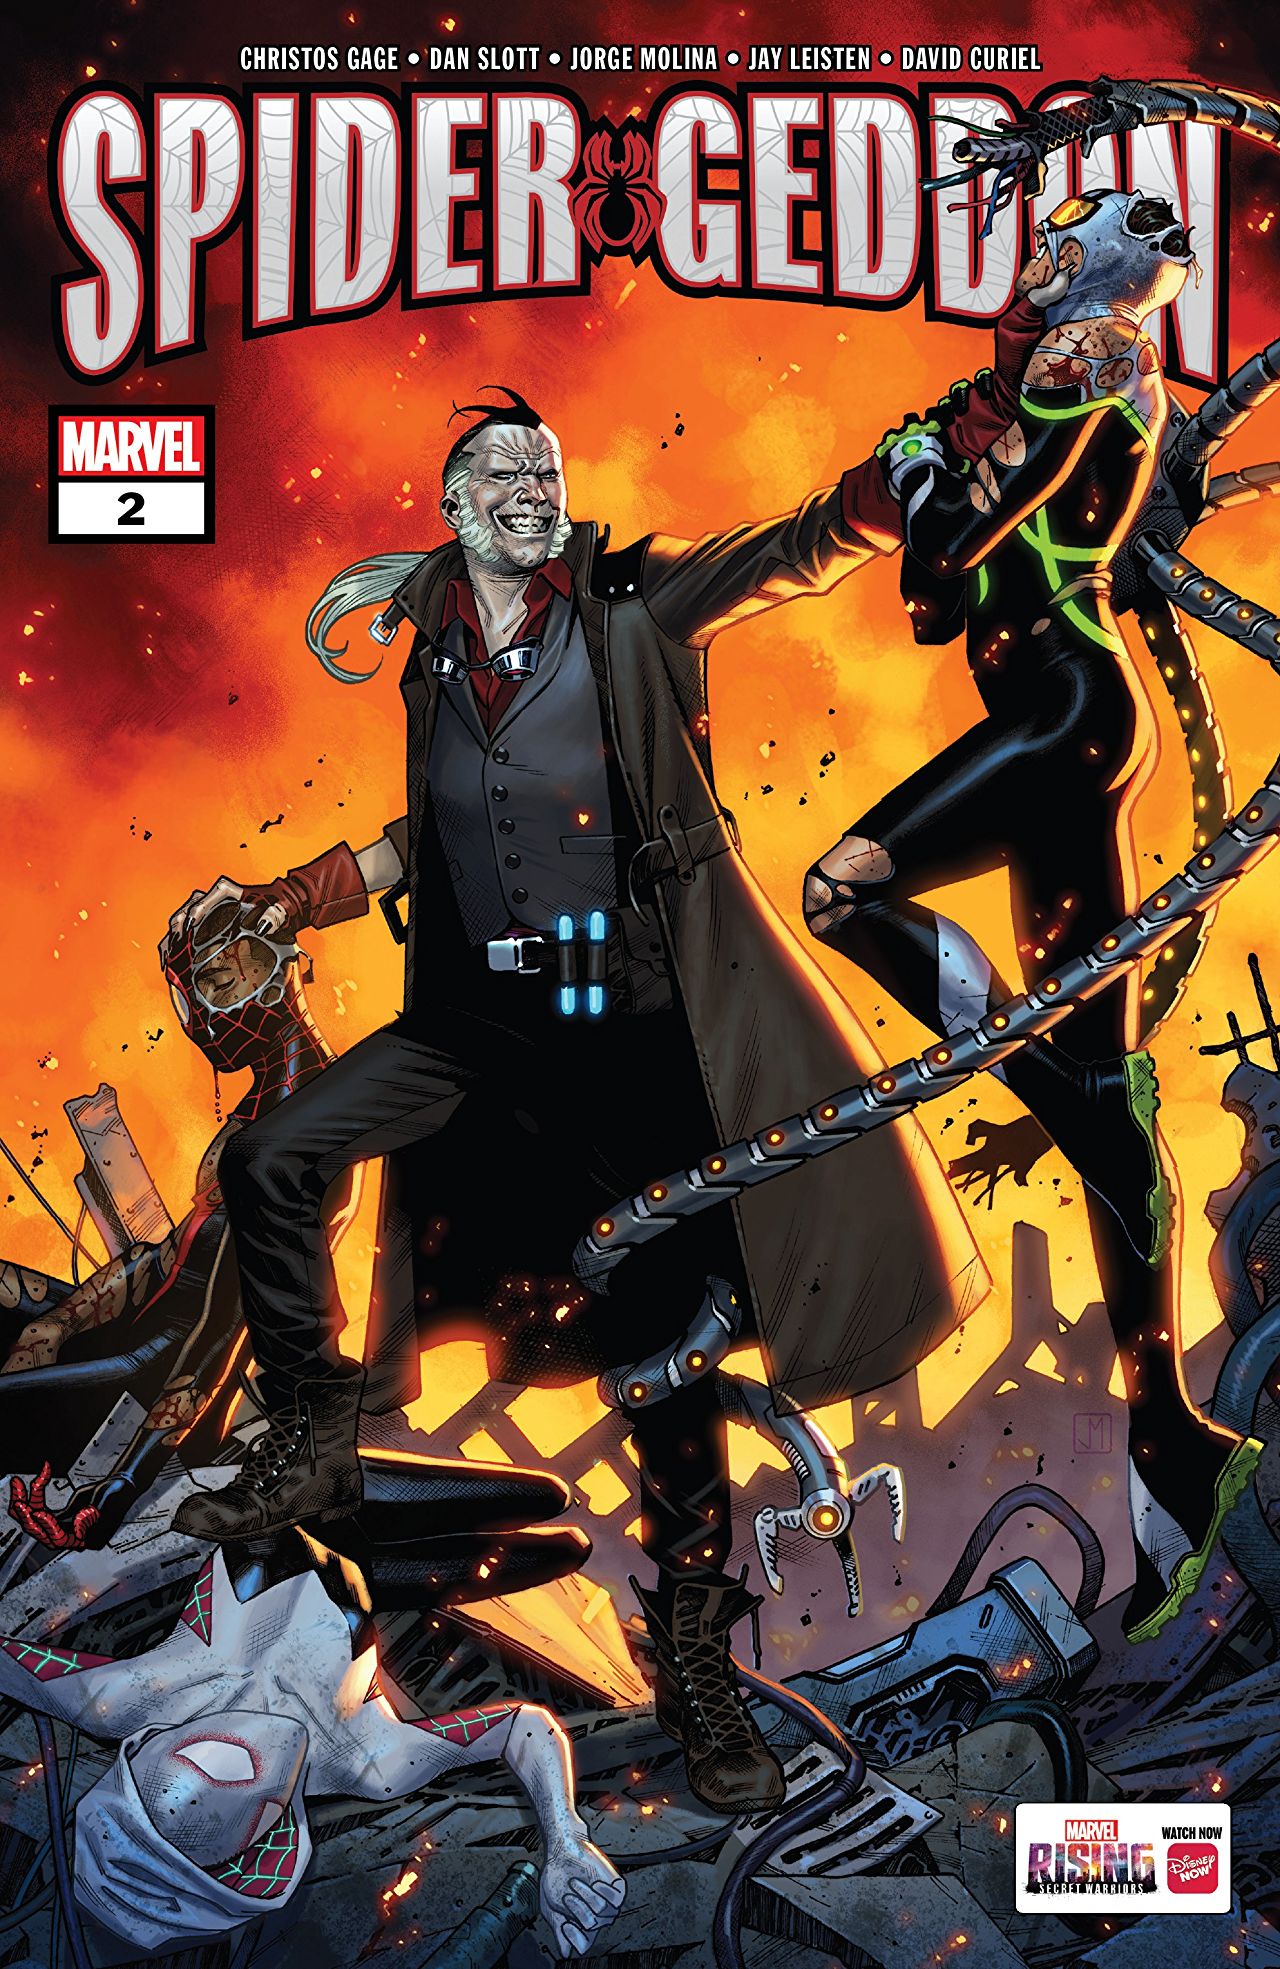 Spider-Geddon #2 review: More weight than one web can hold